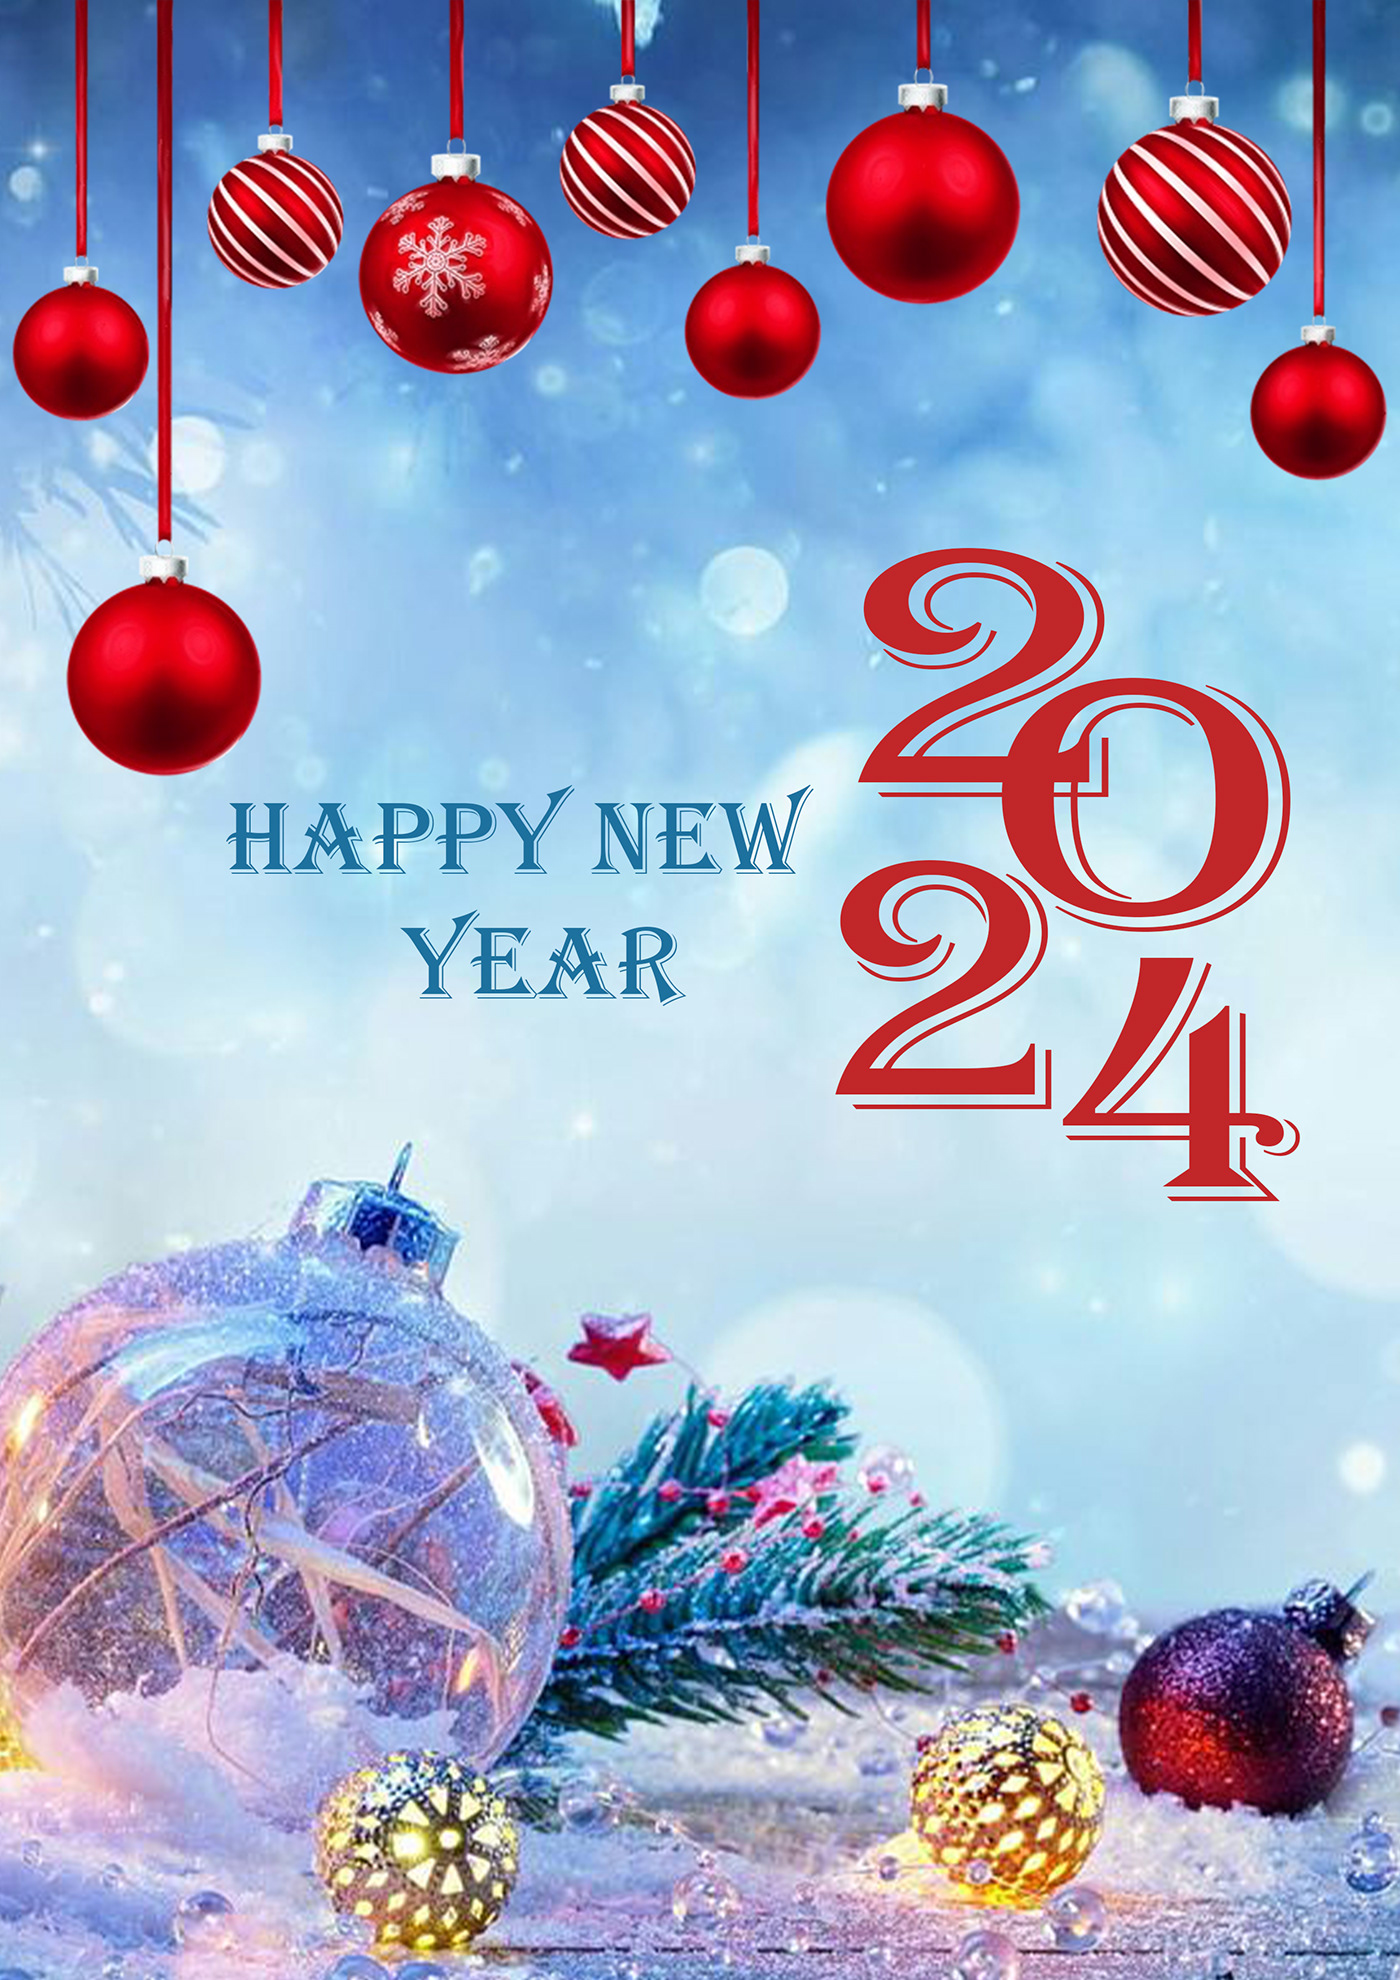 happy new year Christmas Merry Christmas design post Social media post merrychristmas happynewyear Instagram Post HAPPY NEW YEAR POSTER